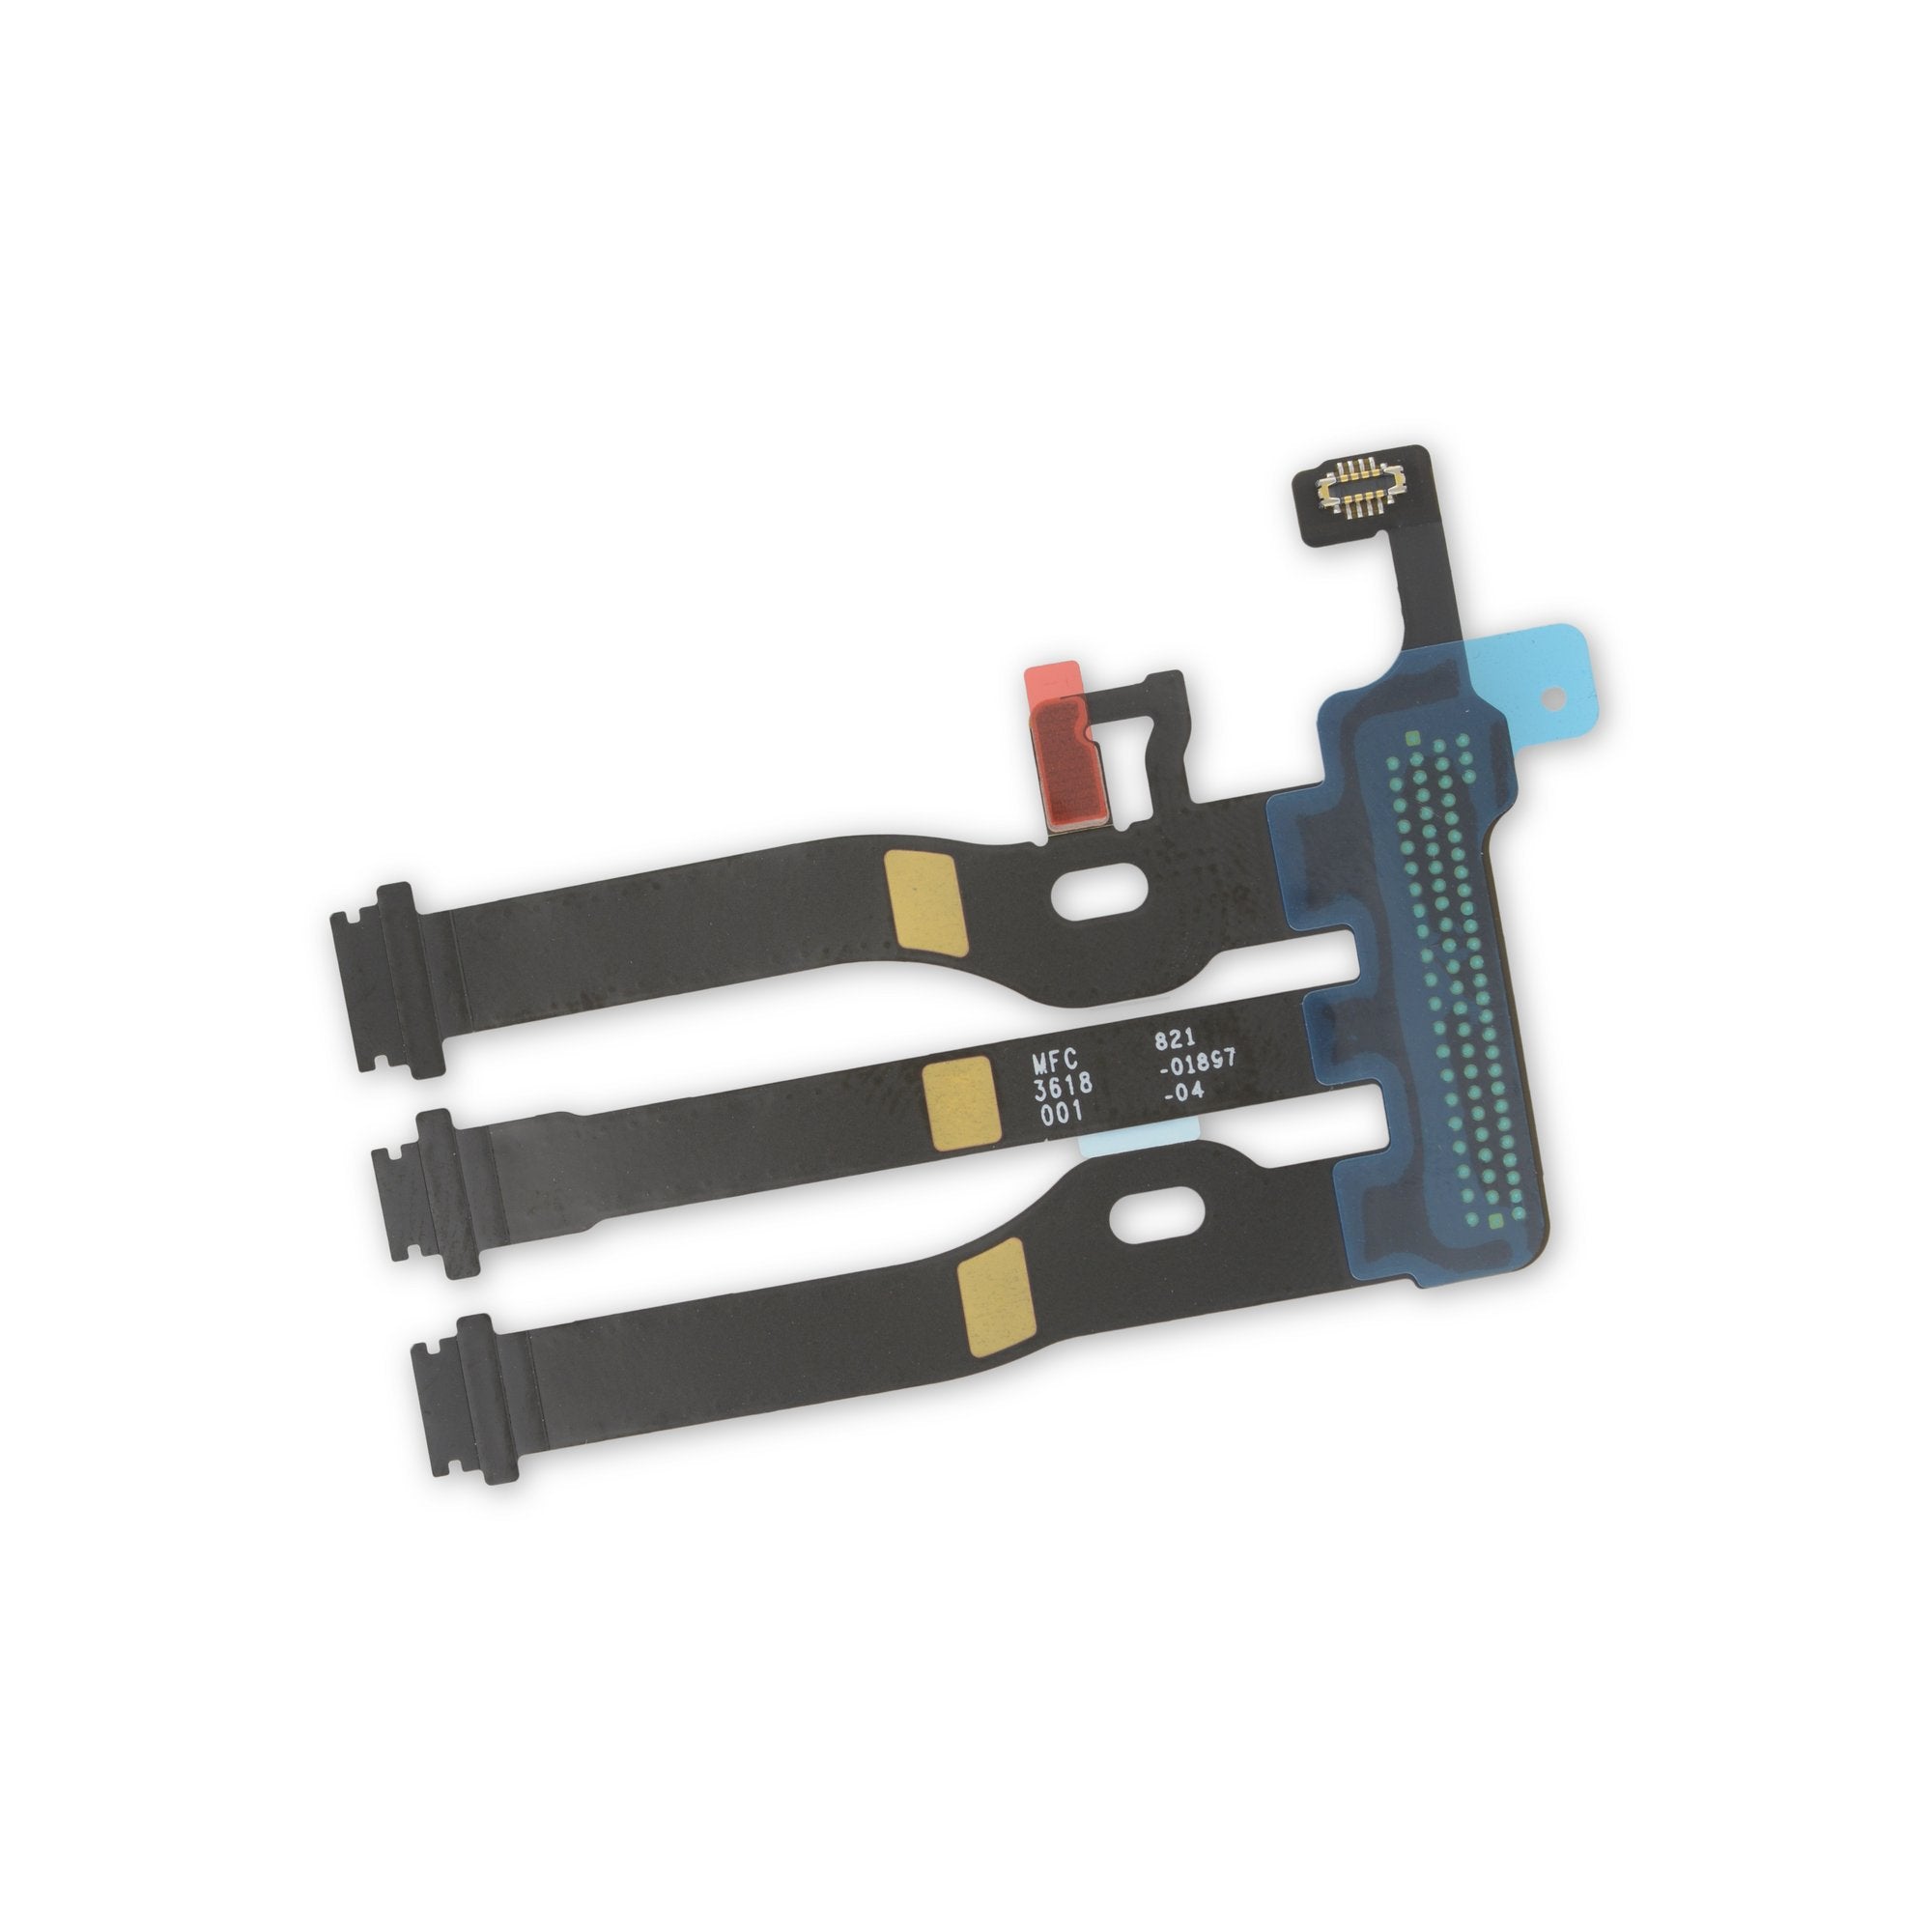 Apple Watch (44 mm Series 4 Cellular) Display Flex Cable